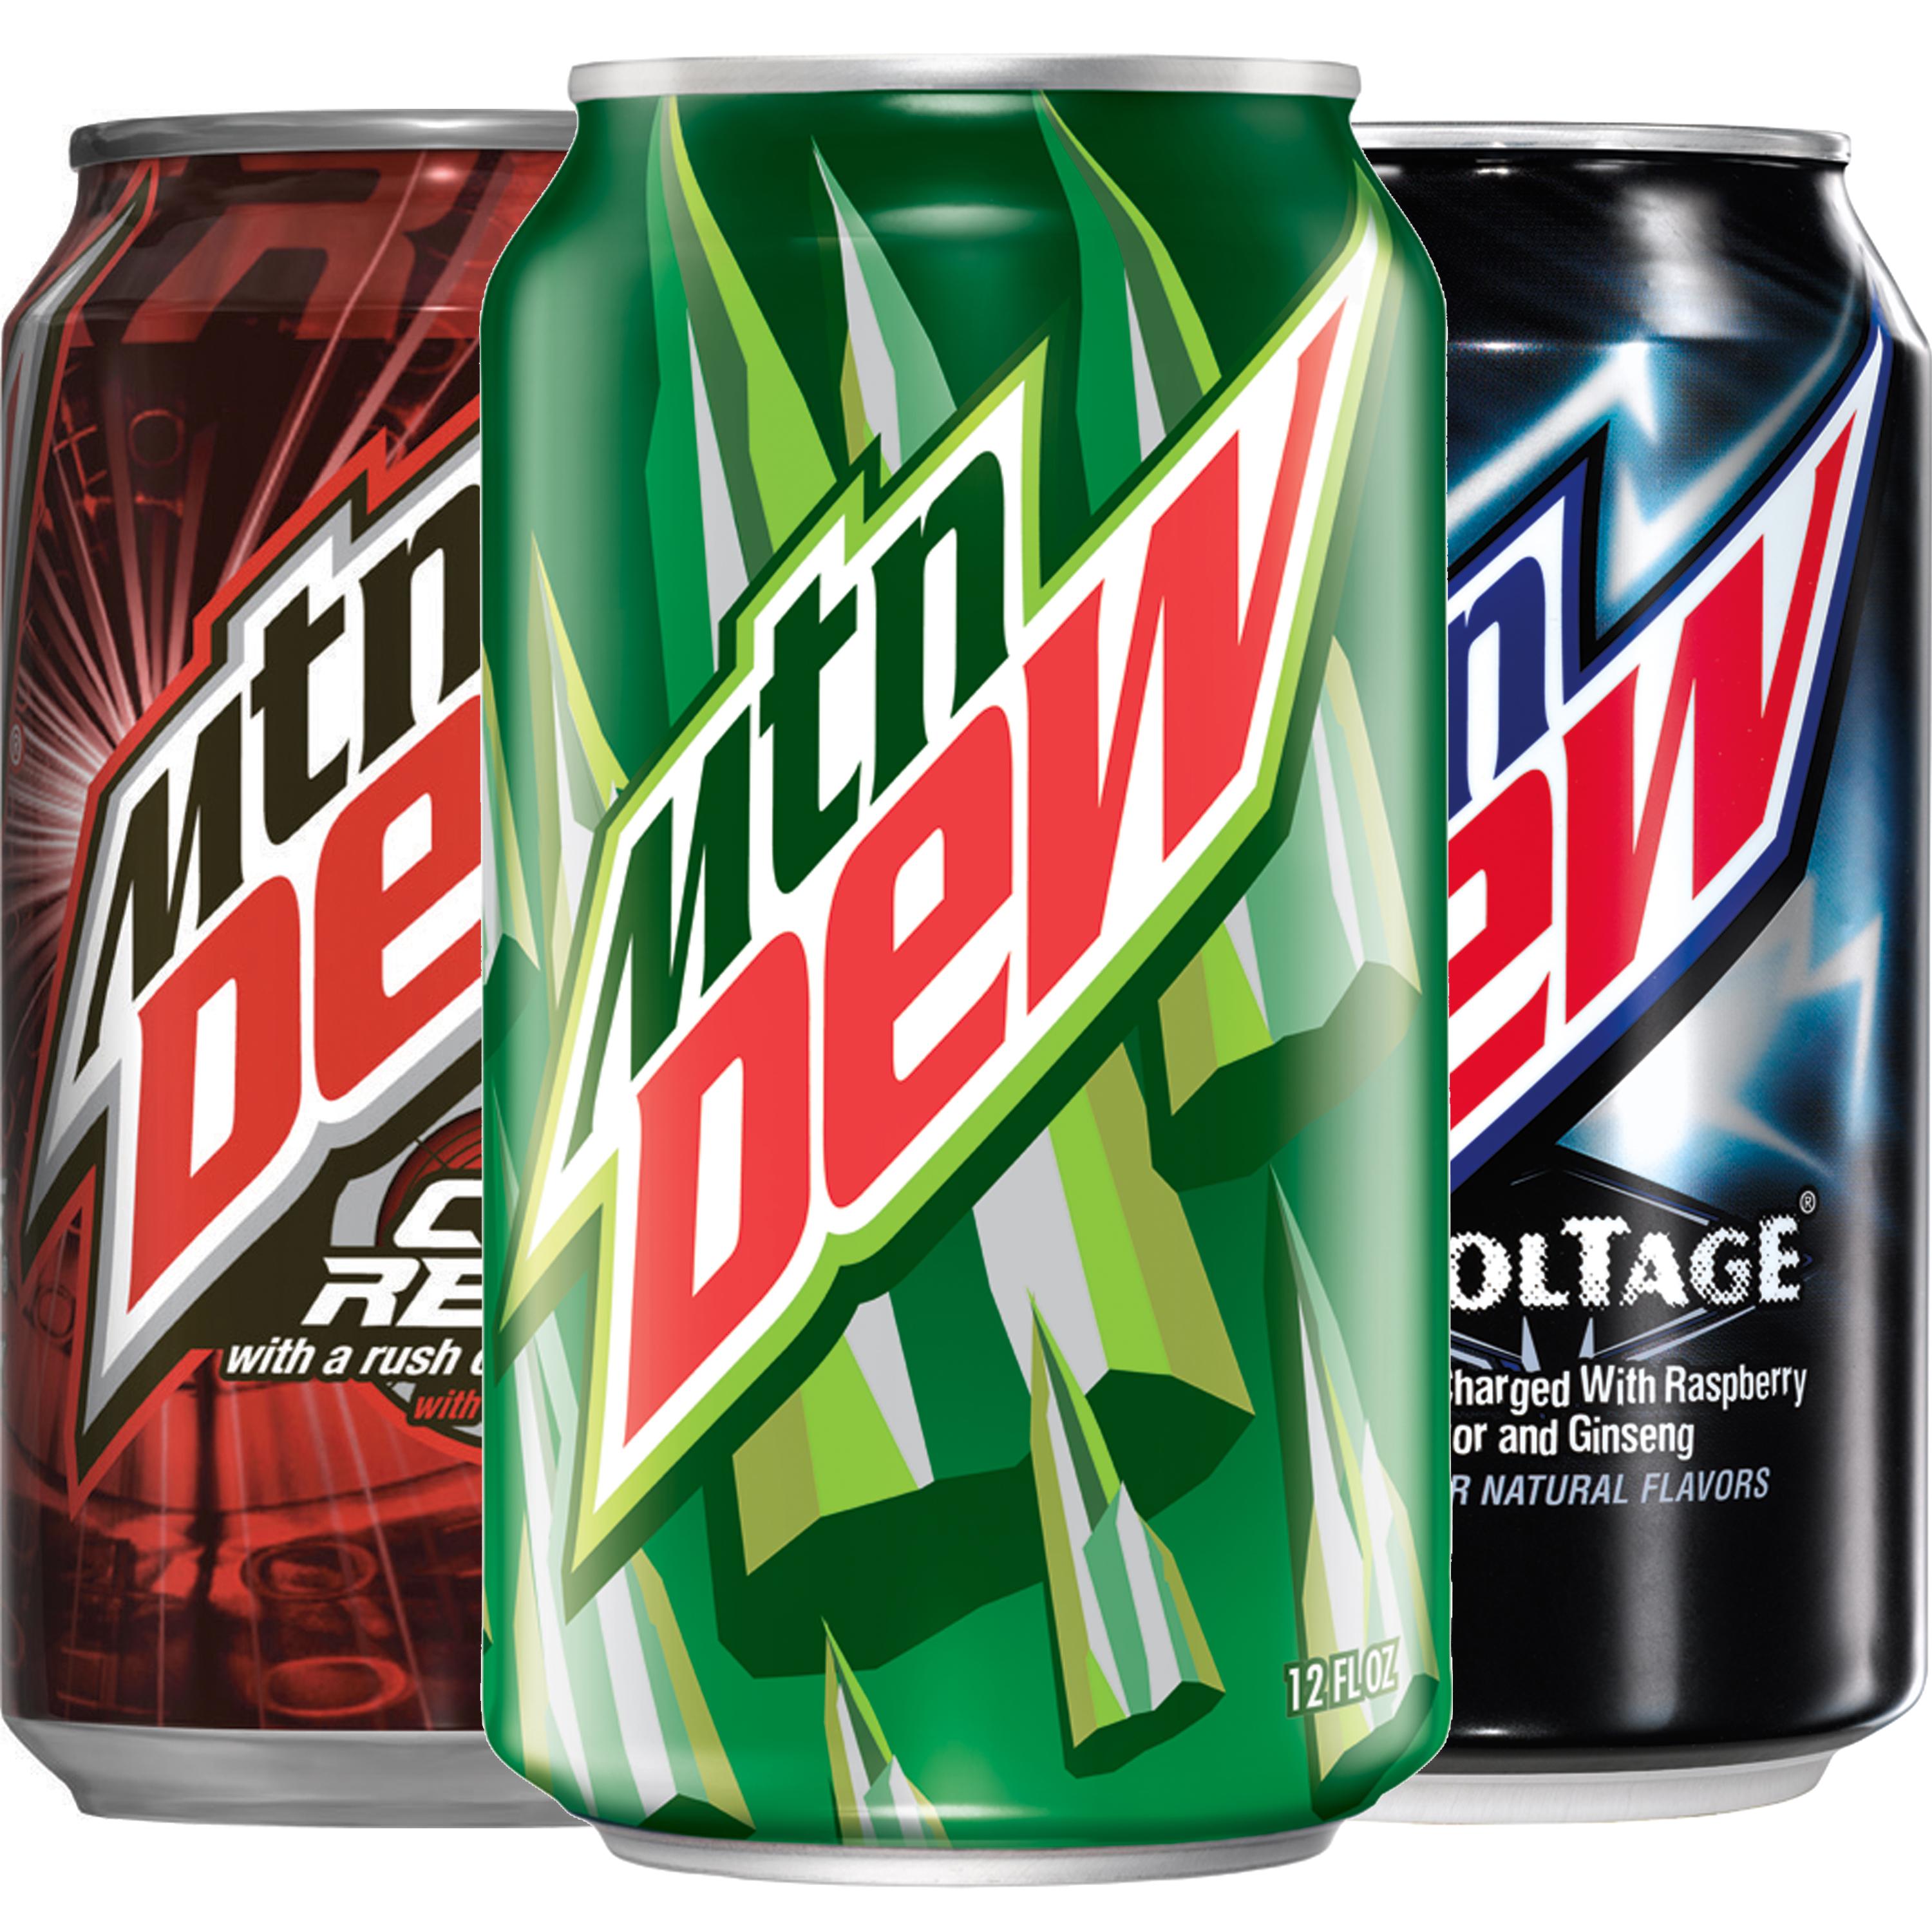 Amazon.com : Mountain Dew Variety Pack, With Mtn Dew, Code Red, and ...